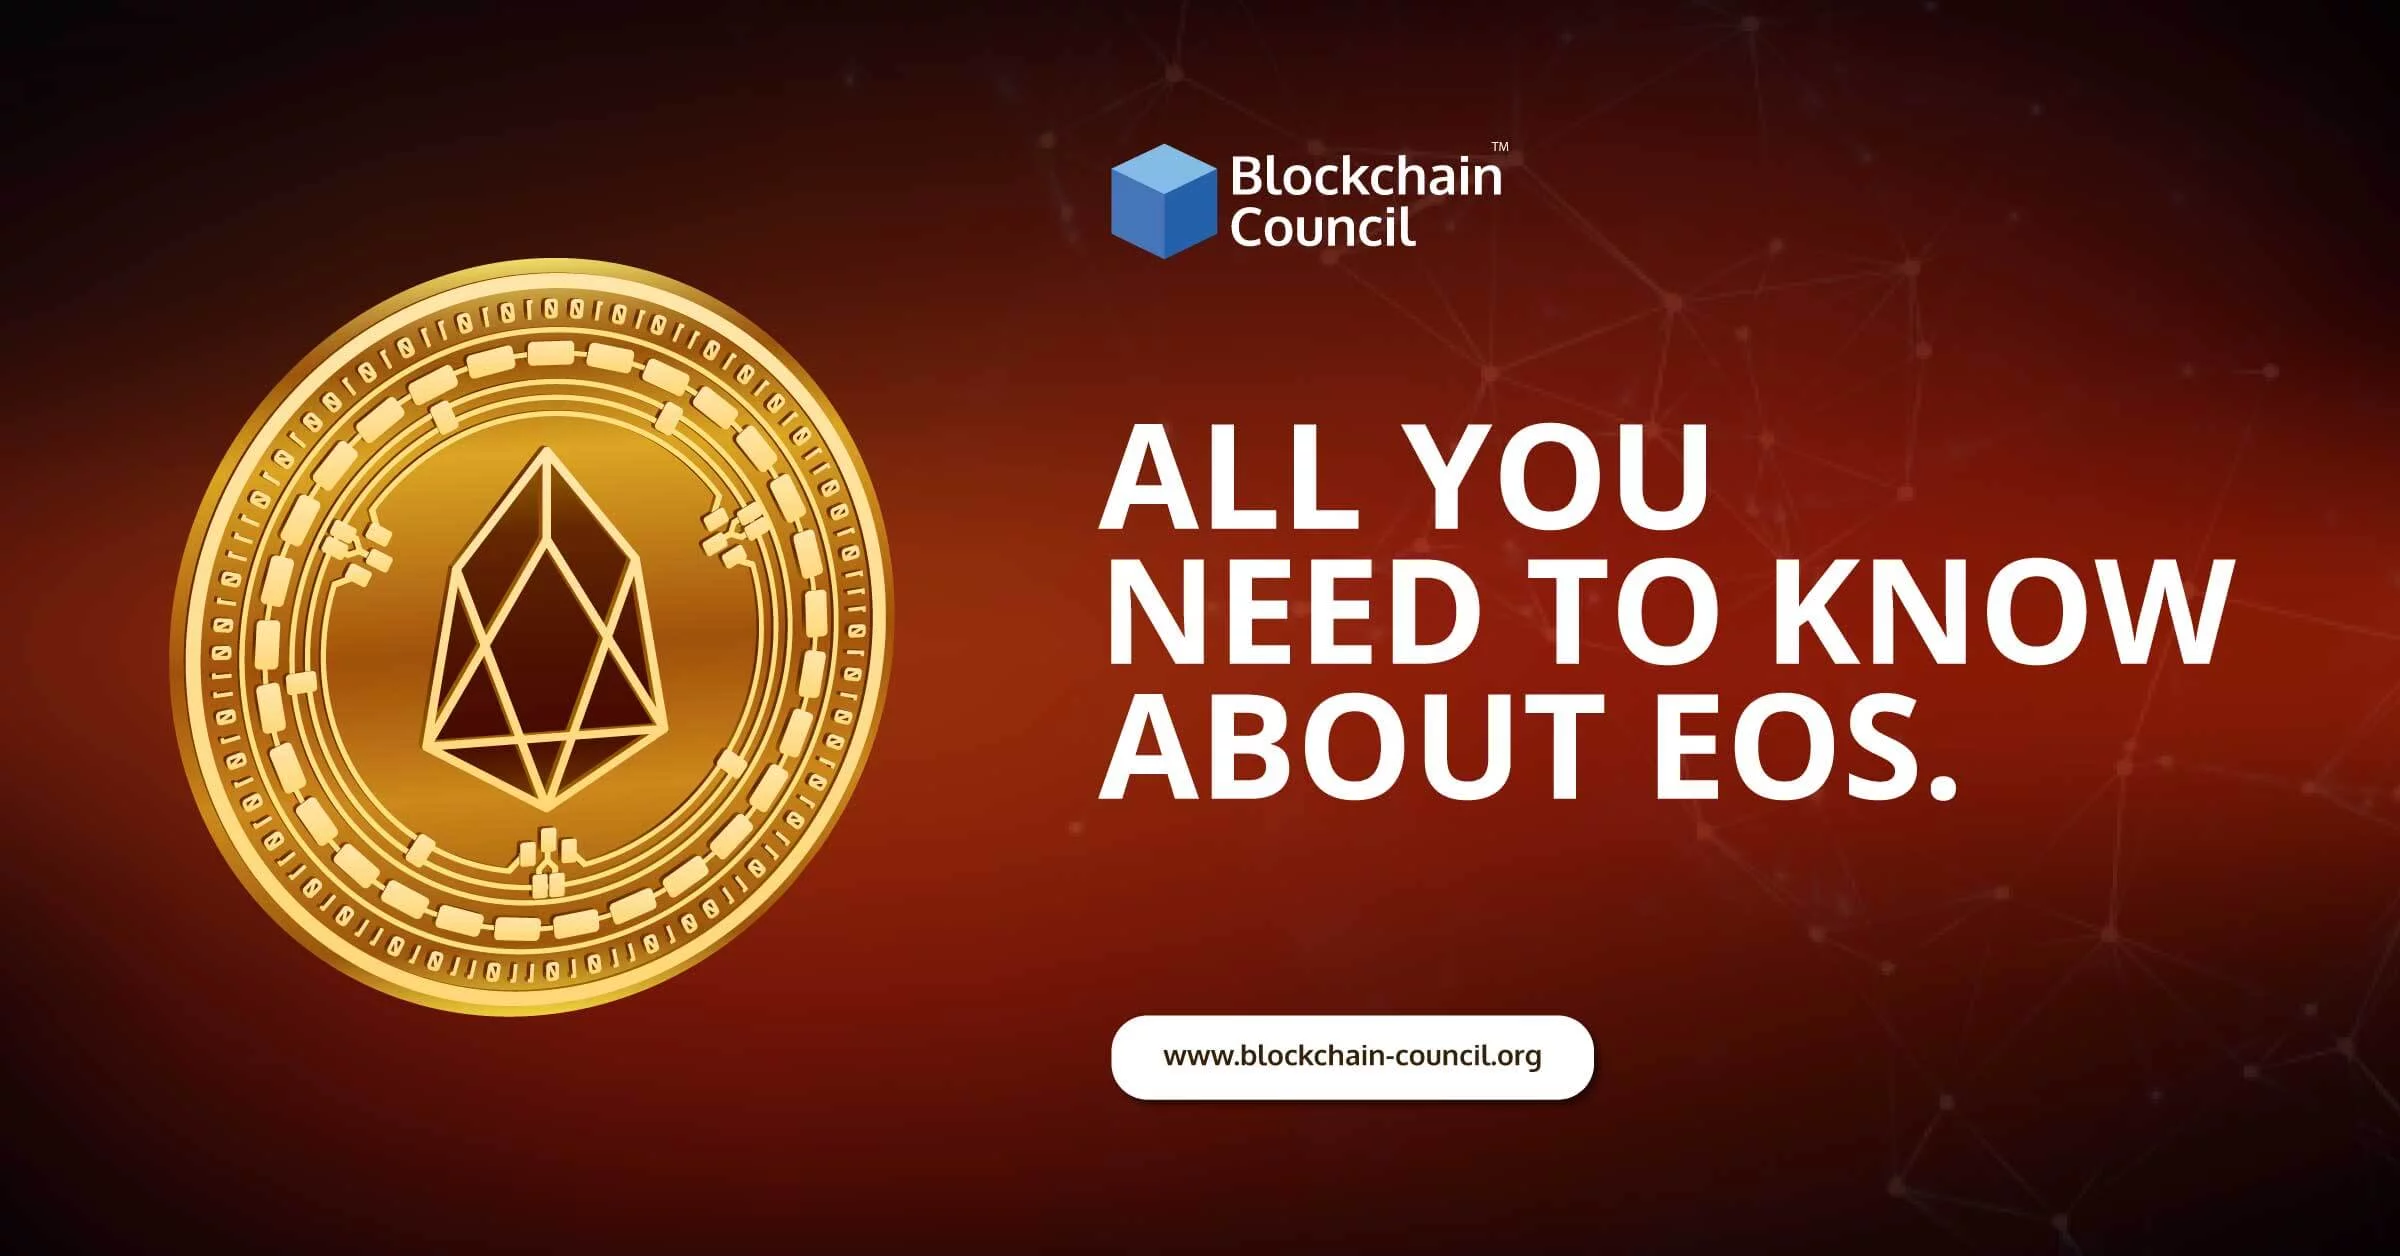 All-You-Need-To-Know-About-EOS